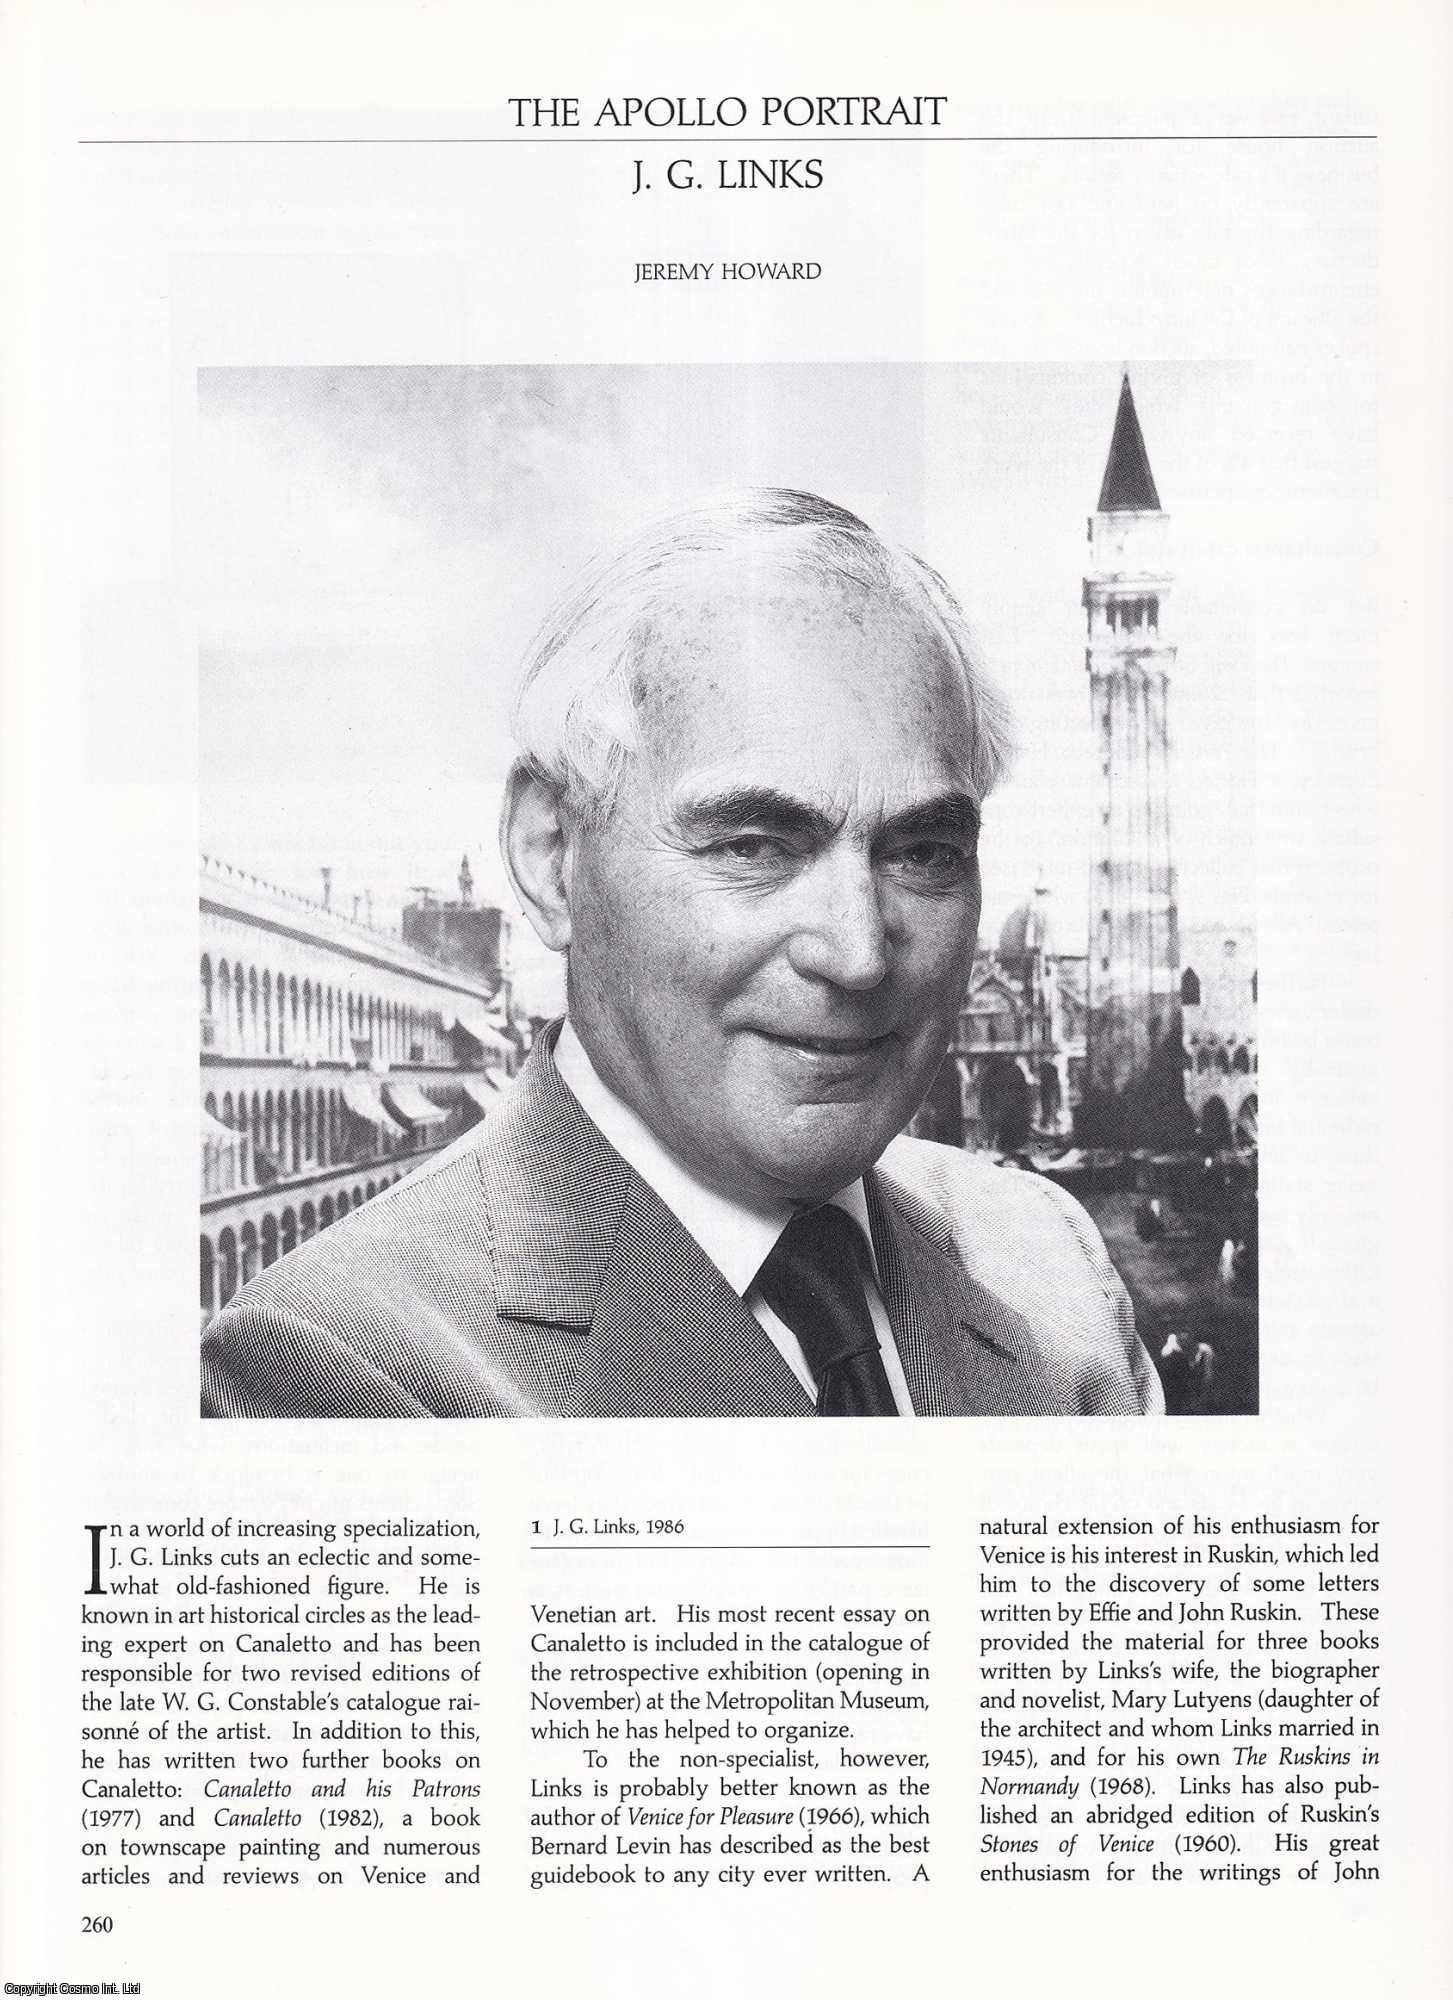 Jeremy Howard - J.G. Links: A Portrait of the Leading Expert on Canaletto. An original article from Apollo, International Magazine of the Arts, 1989.